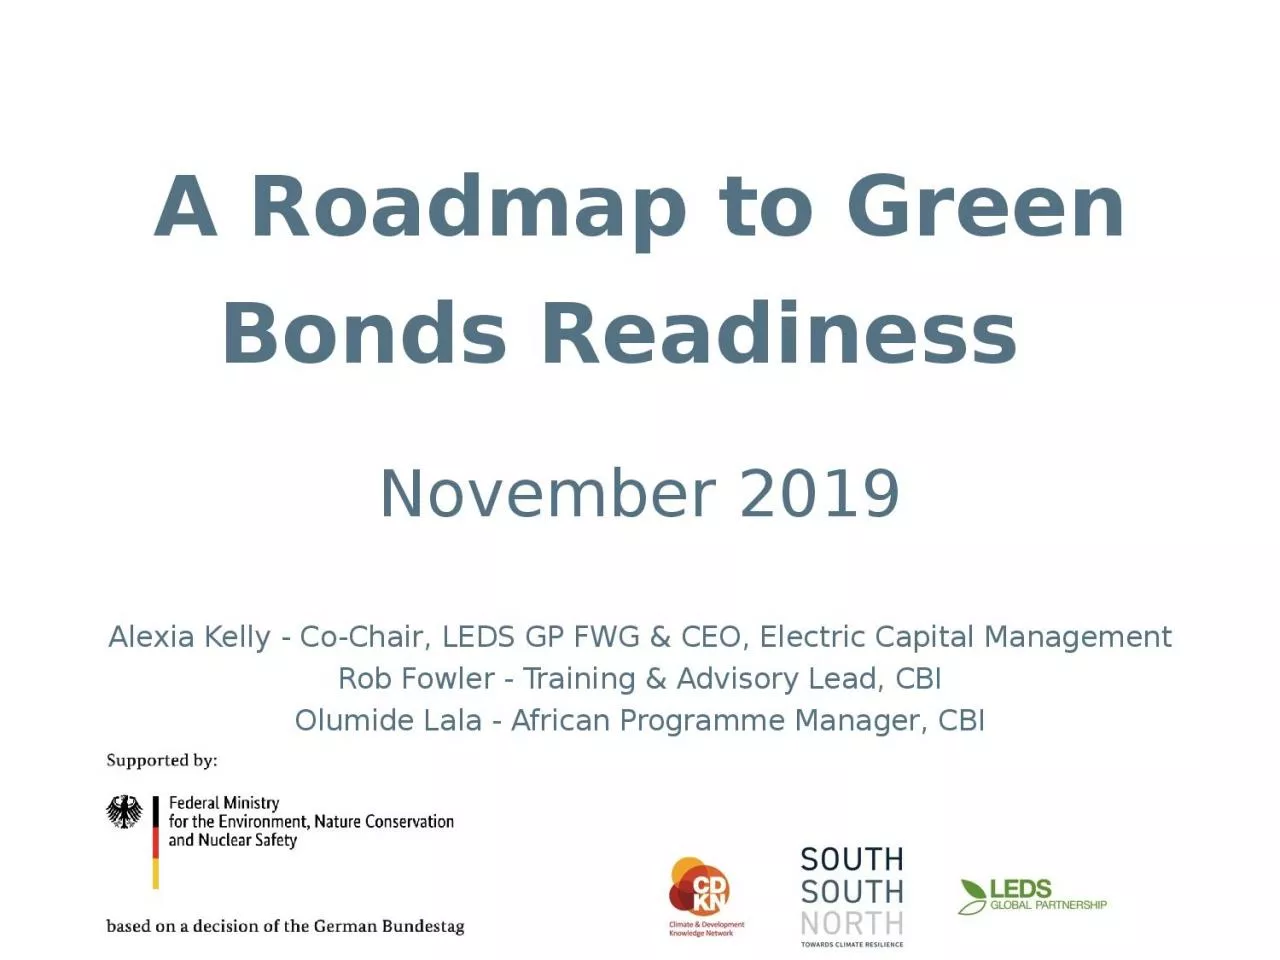 A Roadmap to Green Bonds Readiness